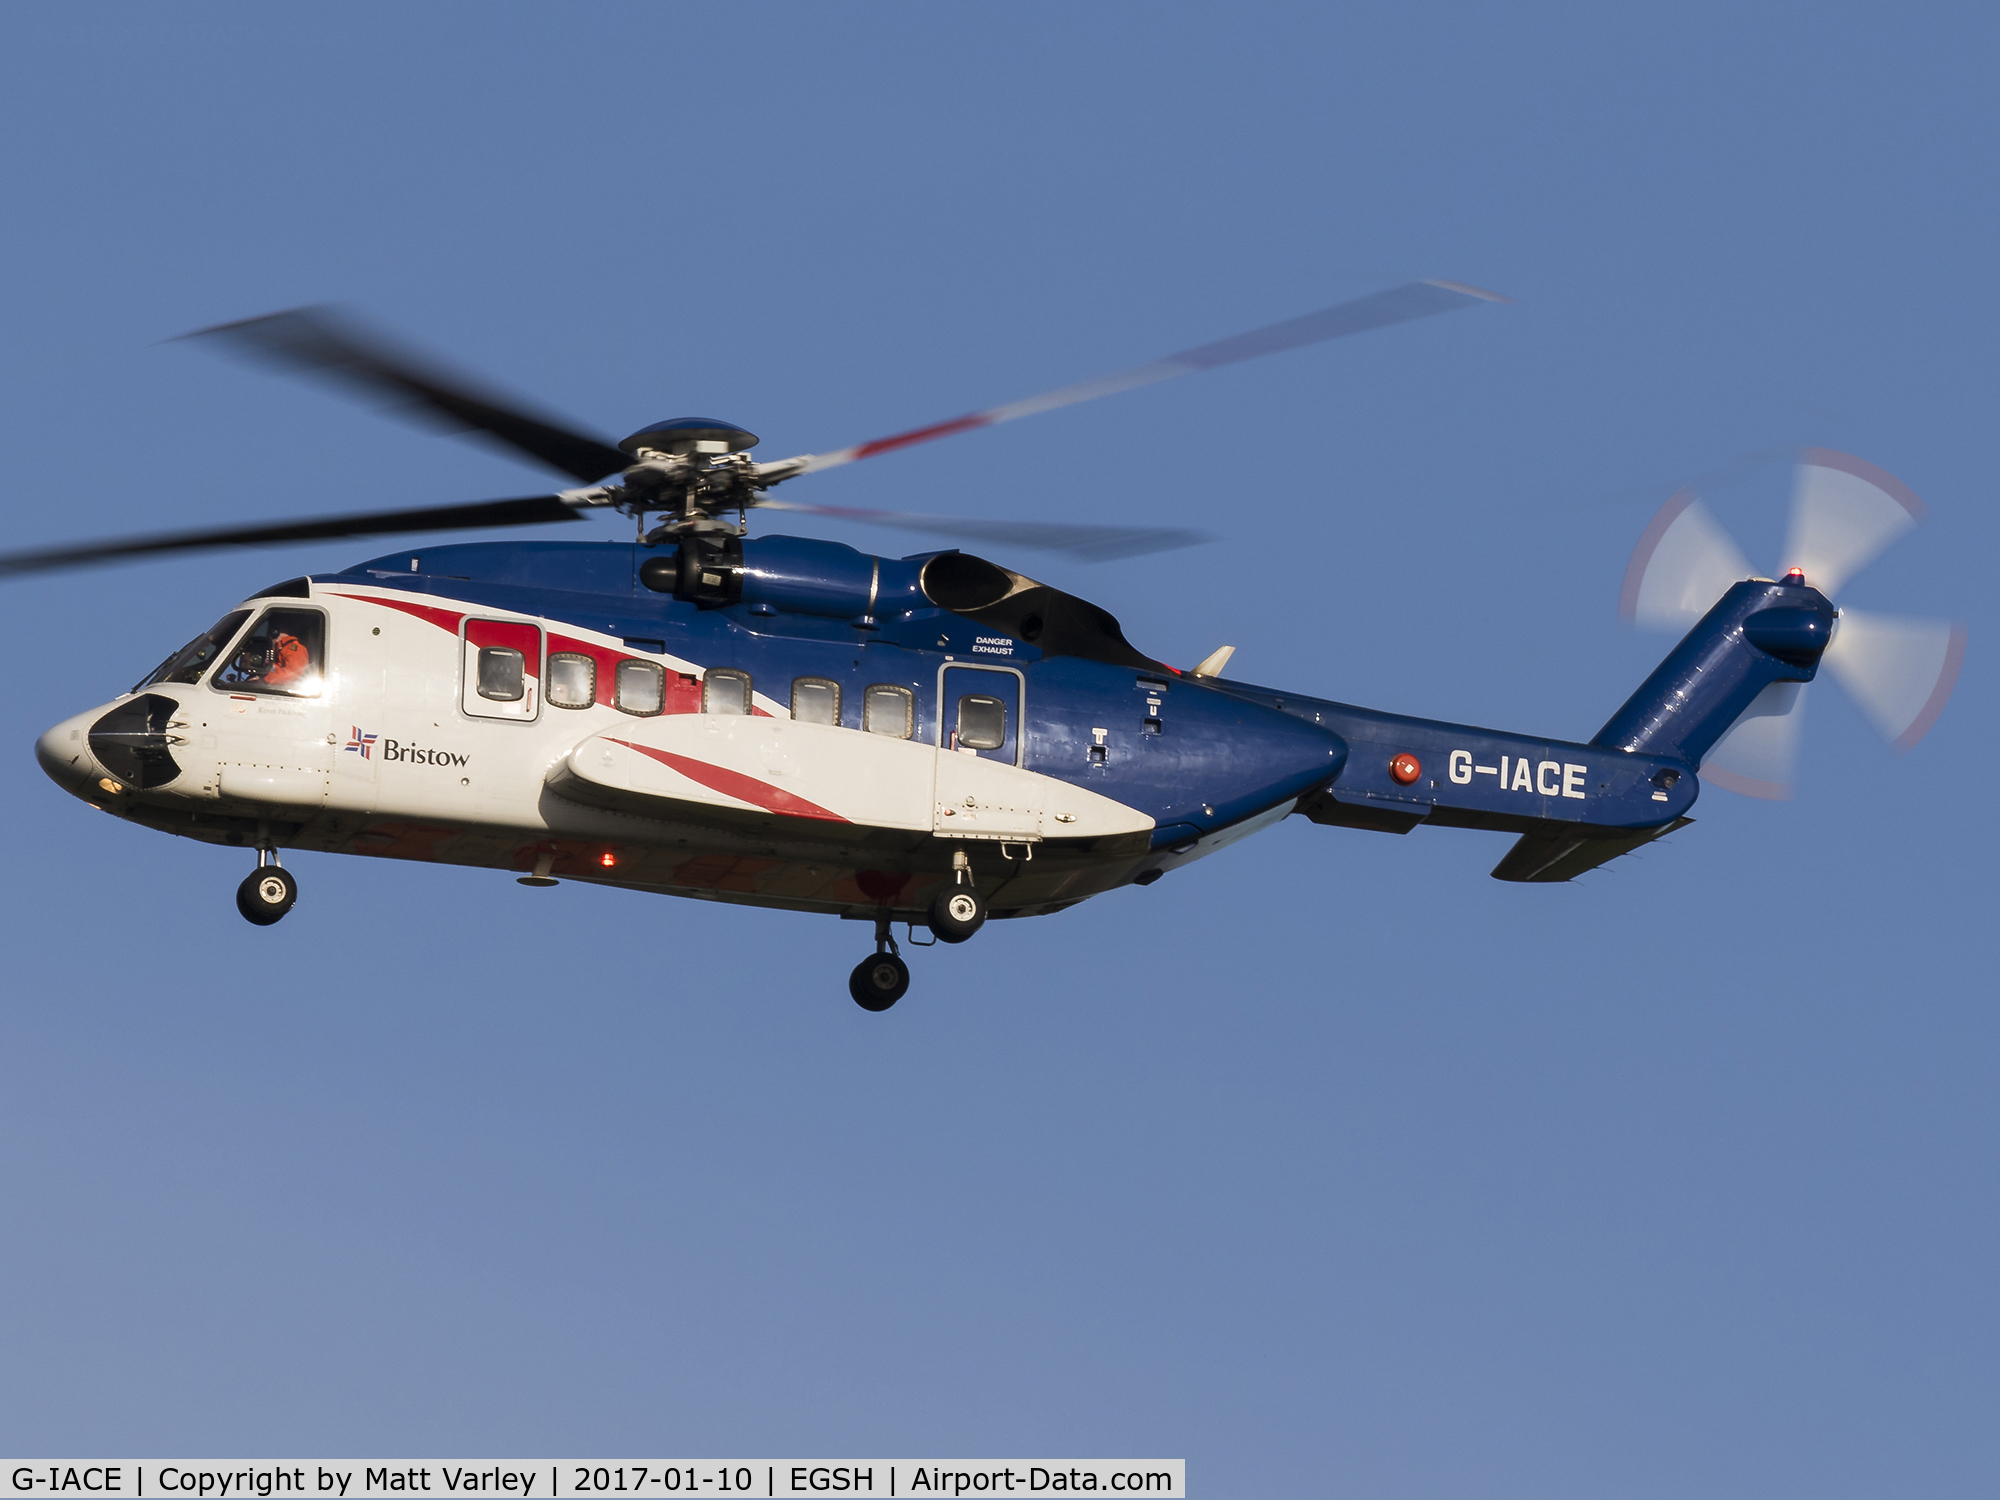 G-IACE, 2007 Sikorsky S-92A C/N 920066, Departing back to Aberdeen in some nice light....